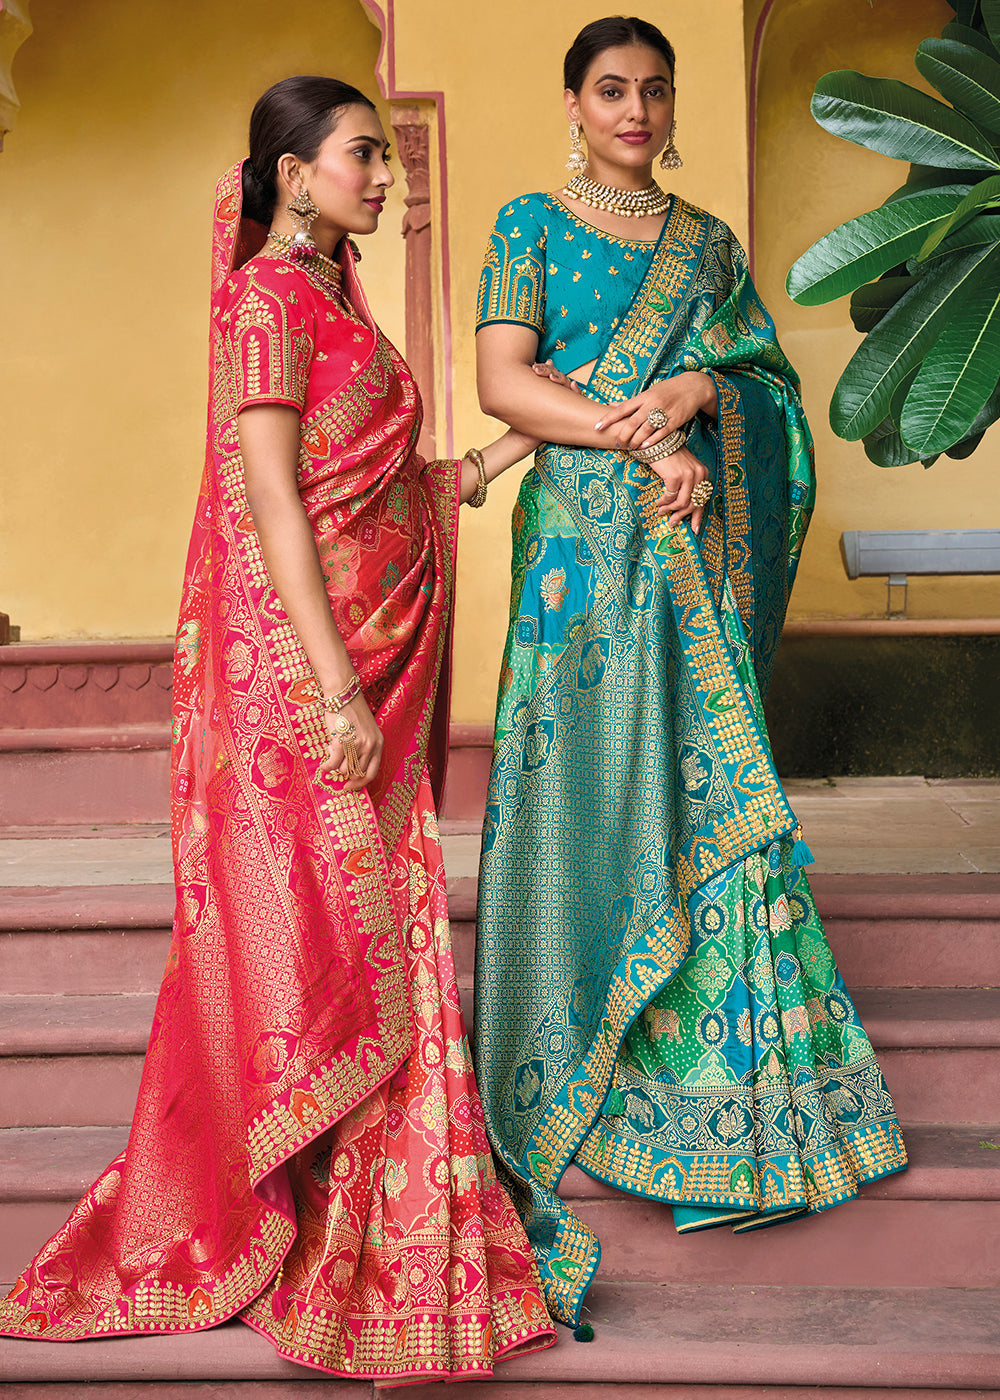 Shades Of Blue Dola Silk Saree with Beautiful Embroidery work: Wedding Edition